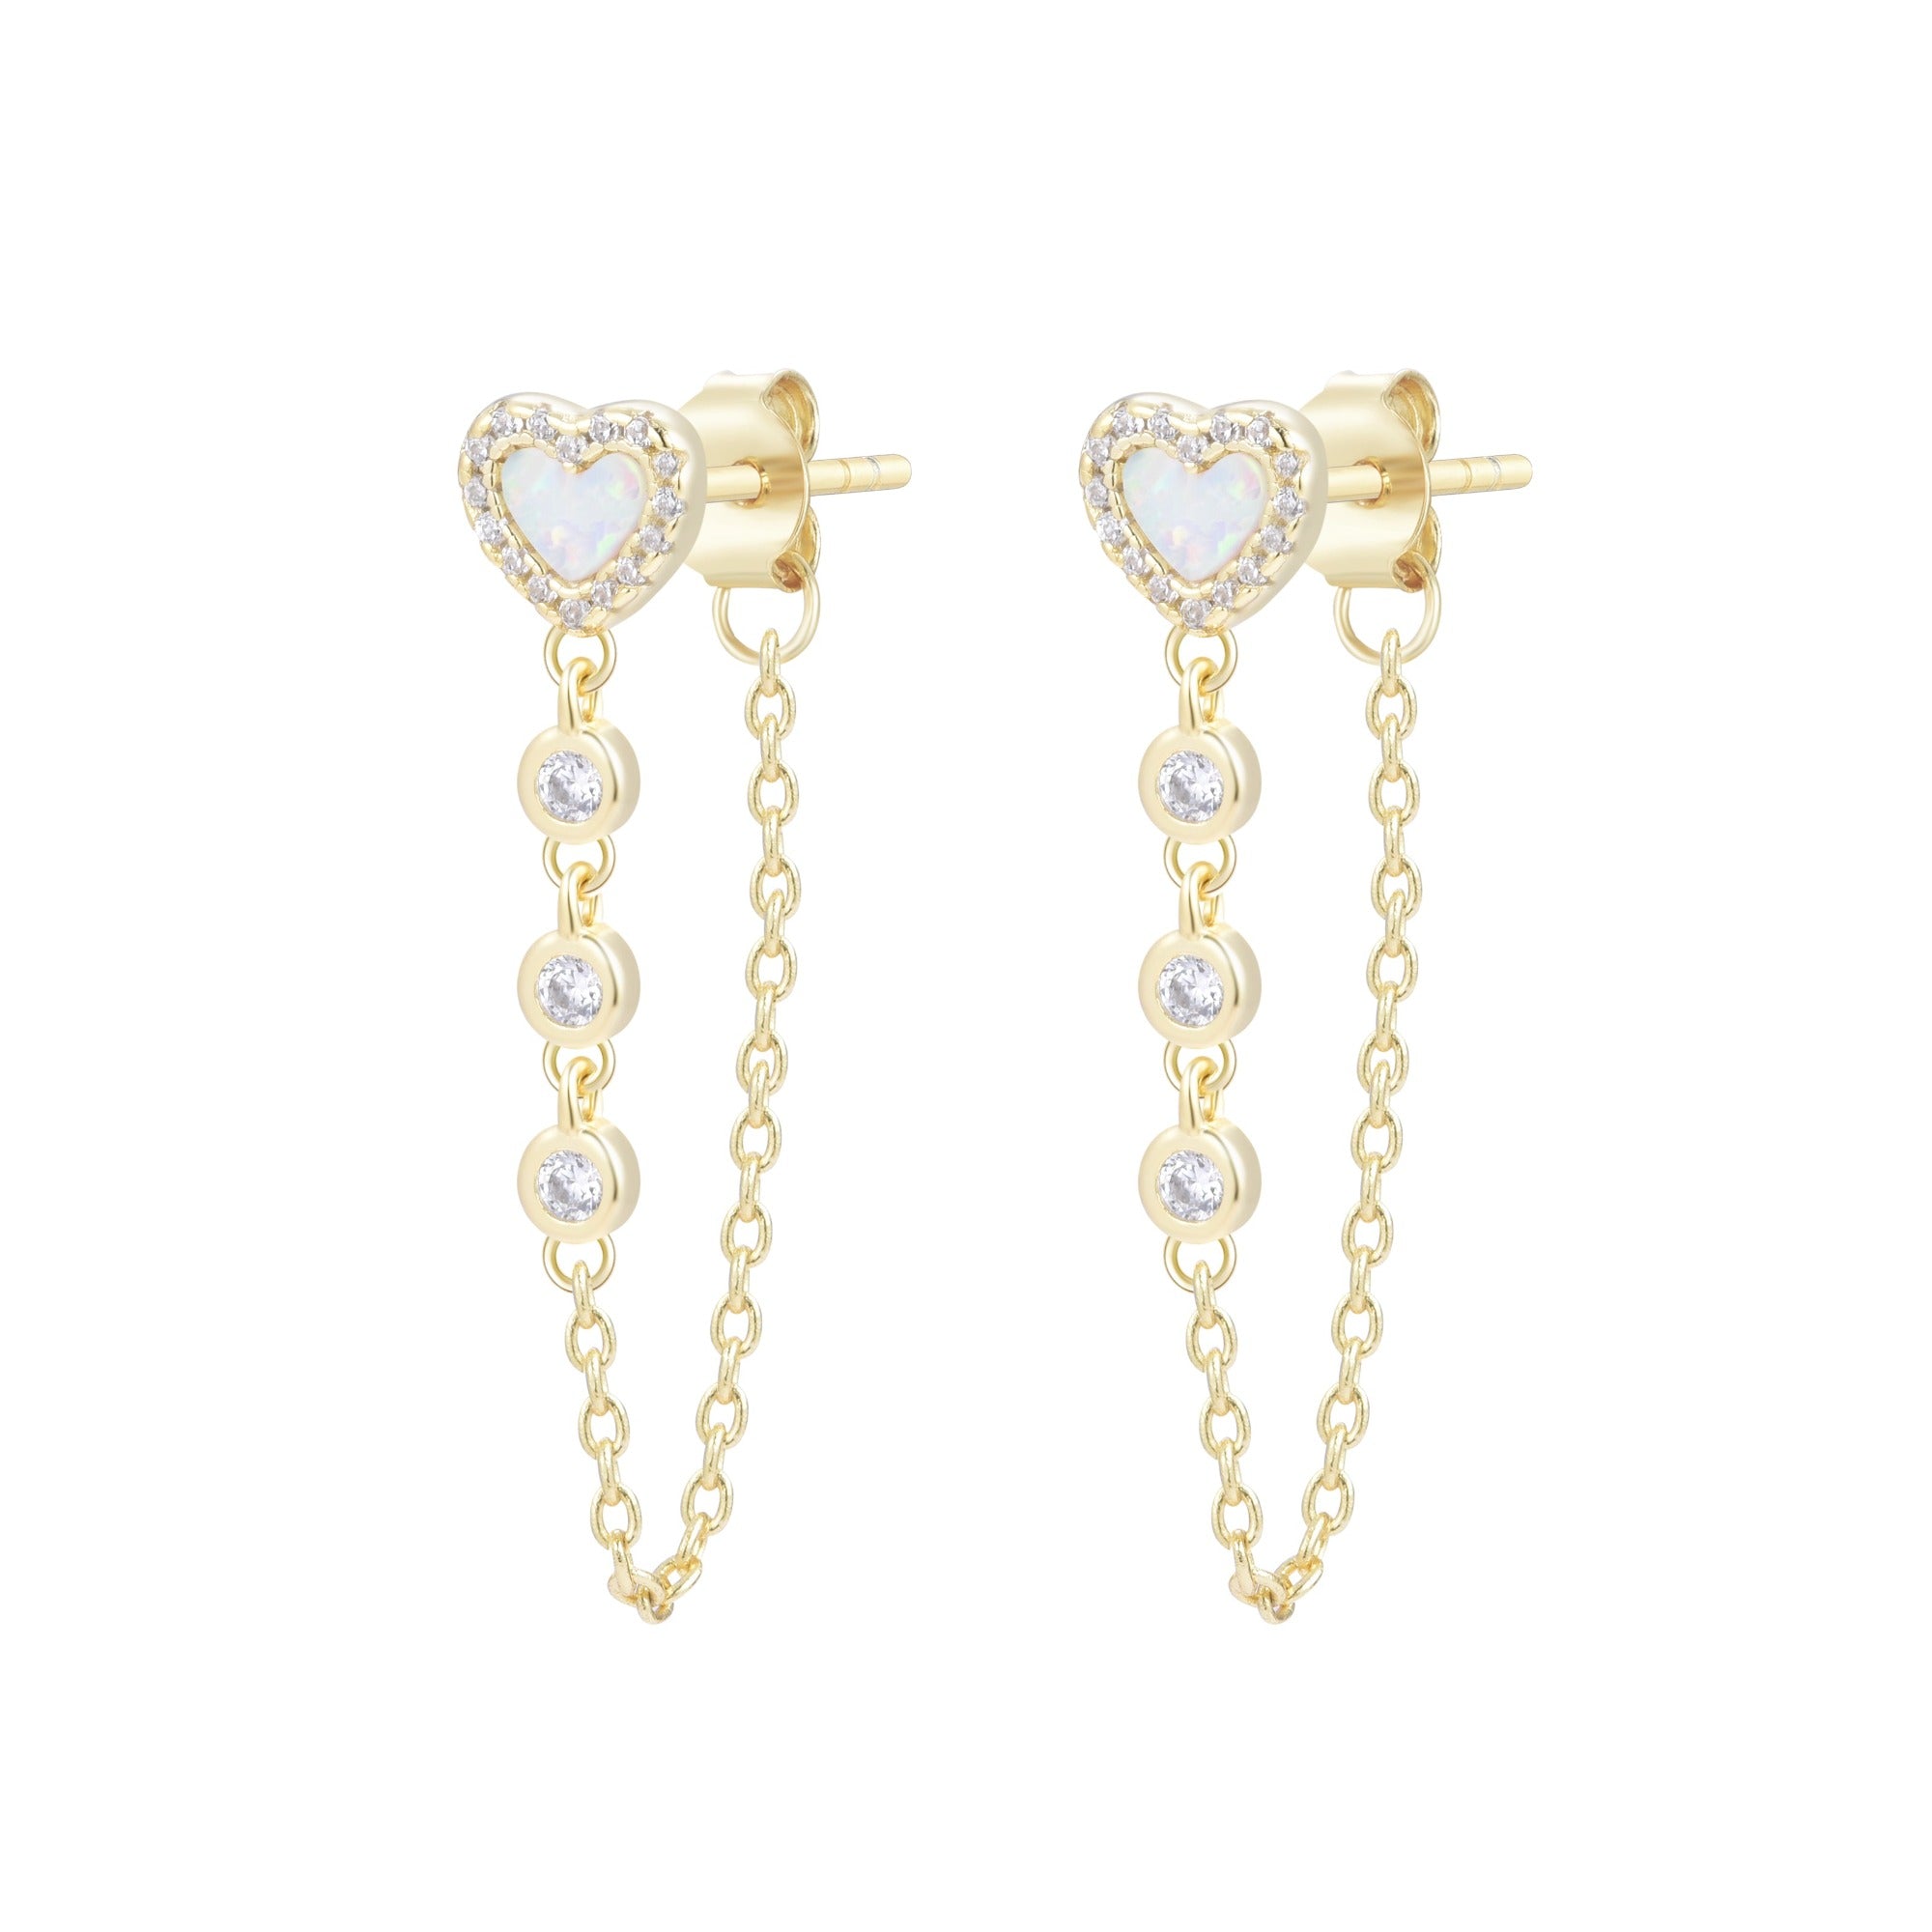 heart chain stud earrings with crystals white opal